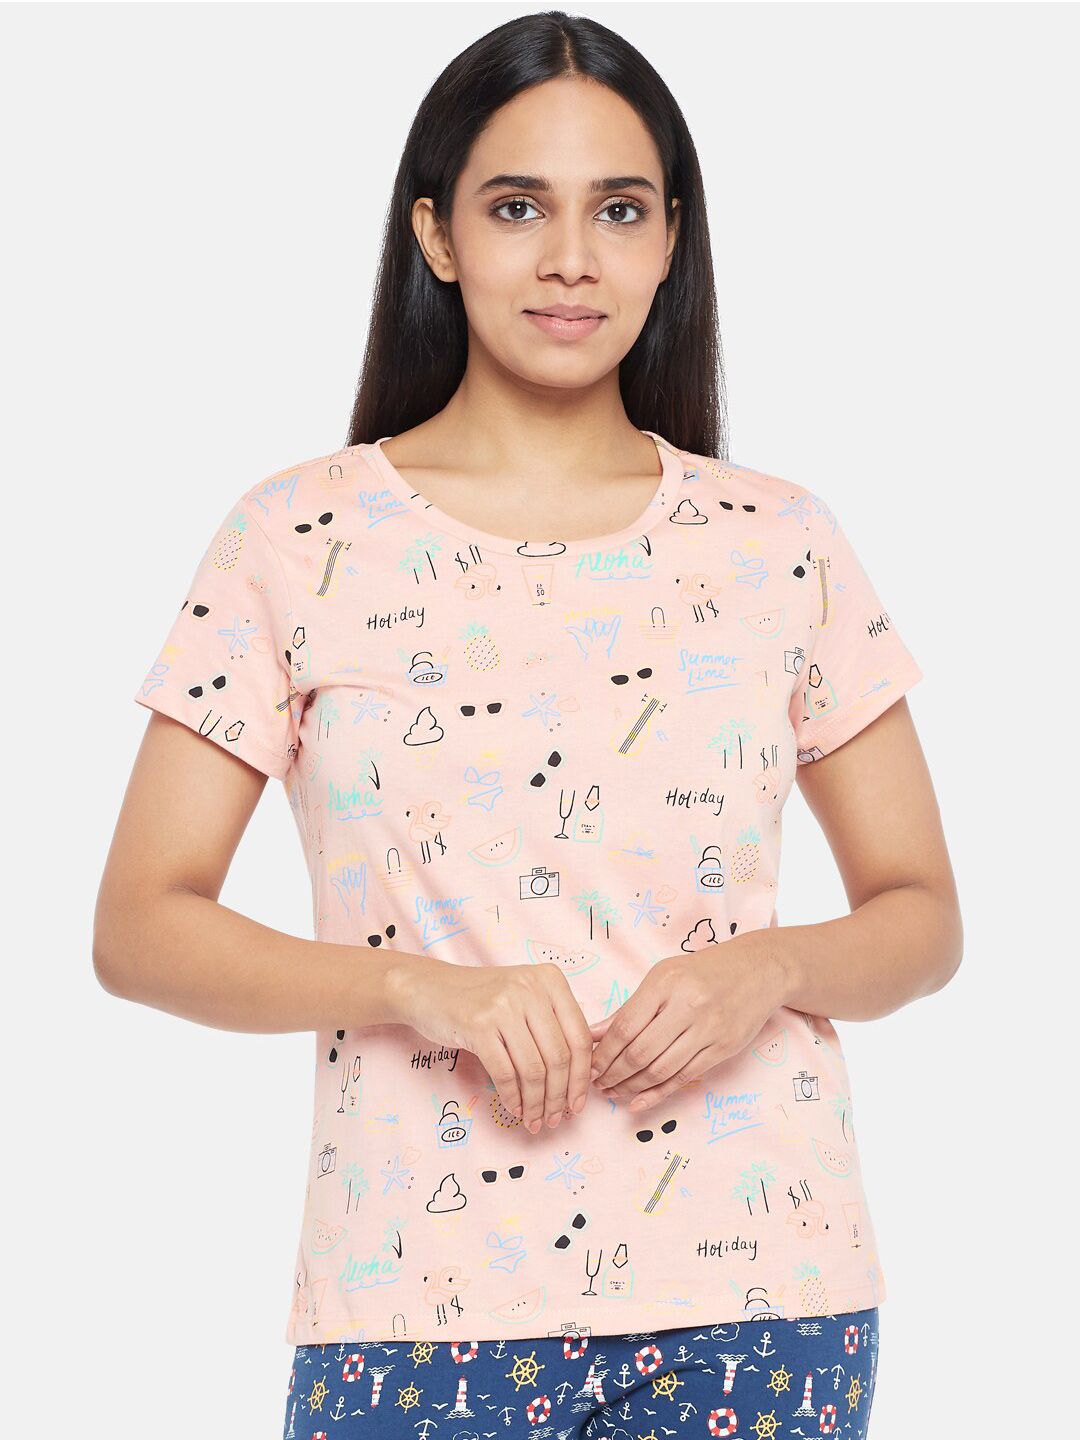 Dreamz by Pantaloons Pink & Black Conversational Printed Pure Cotton Lounge tshirt Price in India